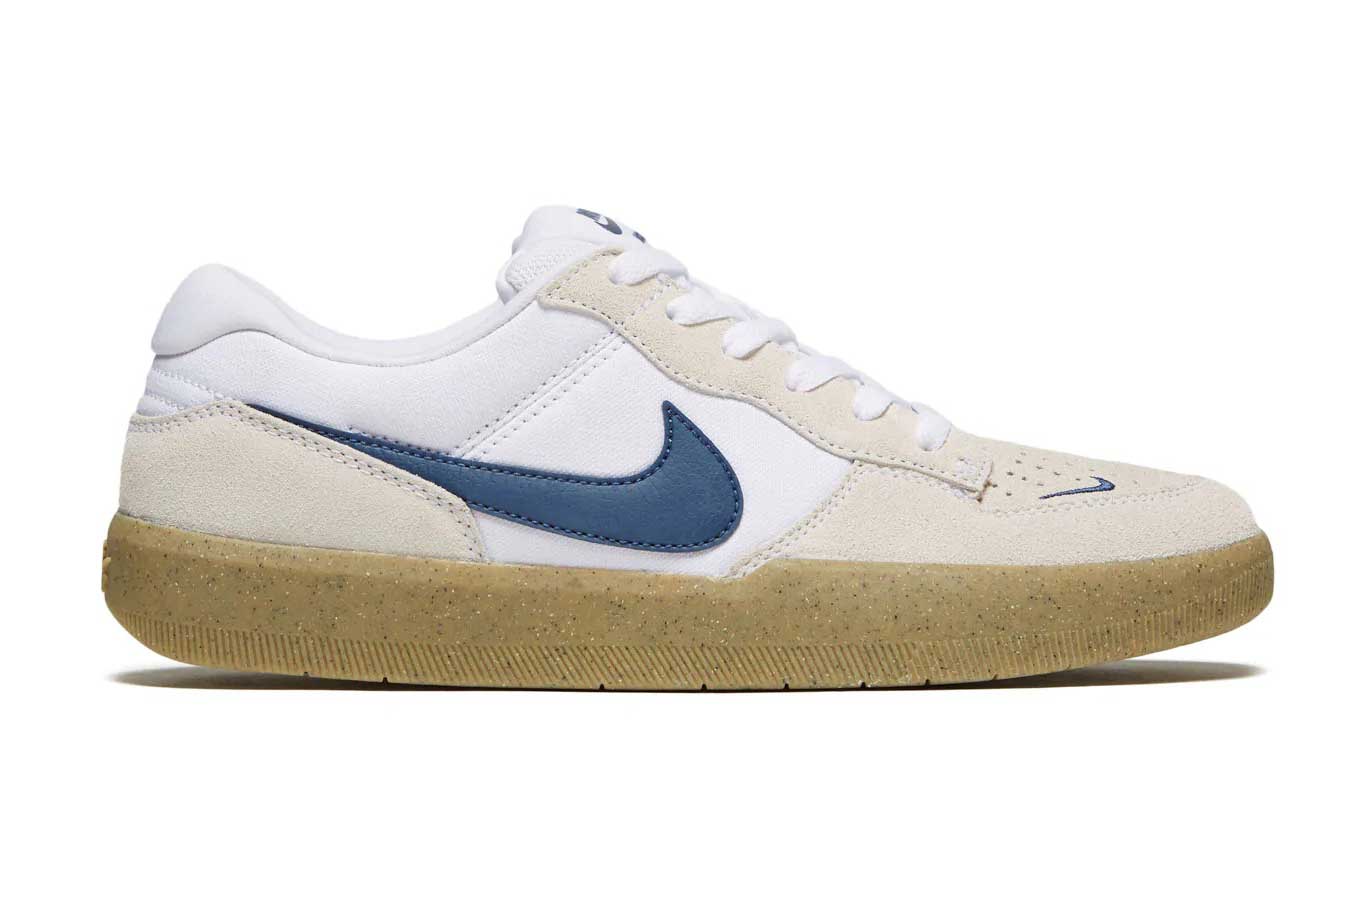 We Love Tom Sachs But His New Nikes Are Bland AF